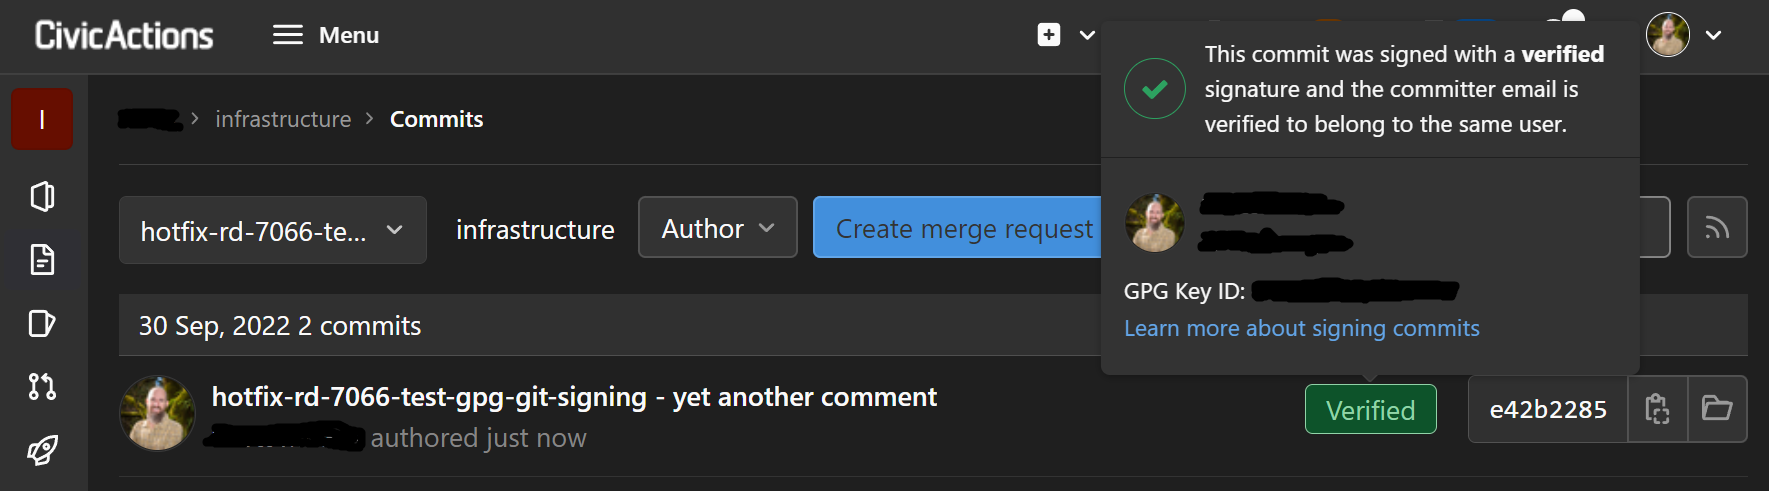 Example Gitlab Signed Commit